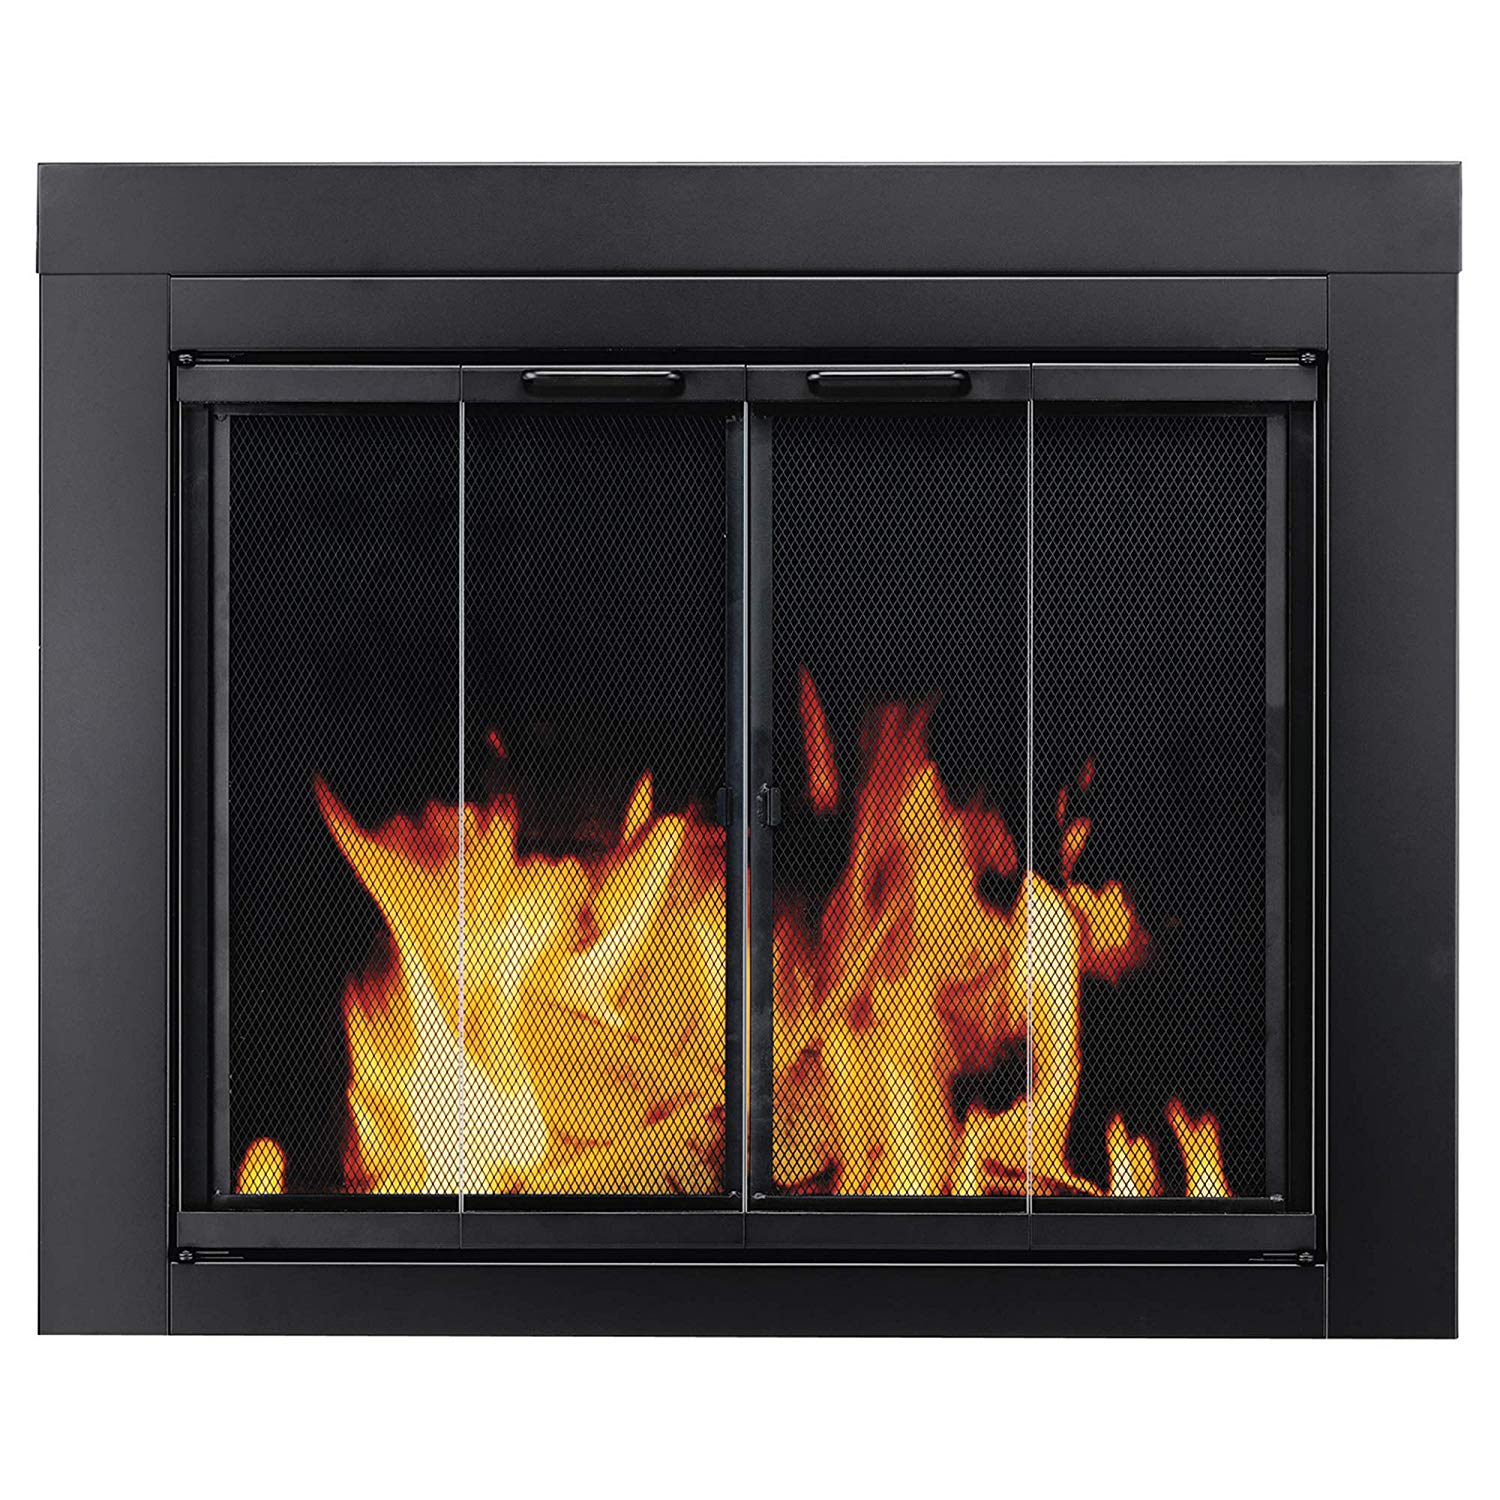 Fireplace Hearth Images Elegant Pleasant Hearth at 1000 ascot Fireplace Glass Door Black Small